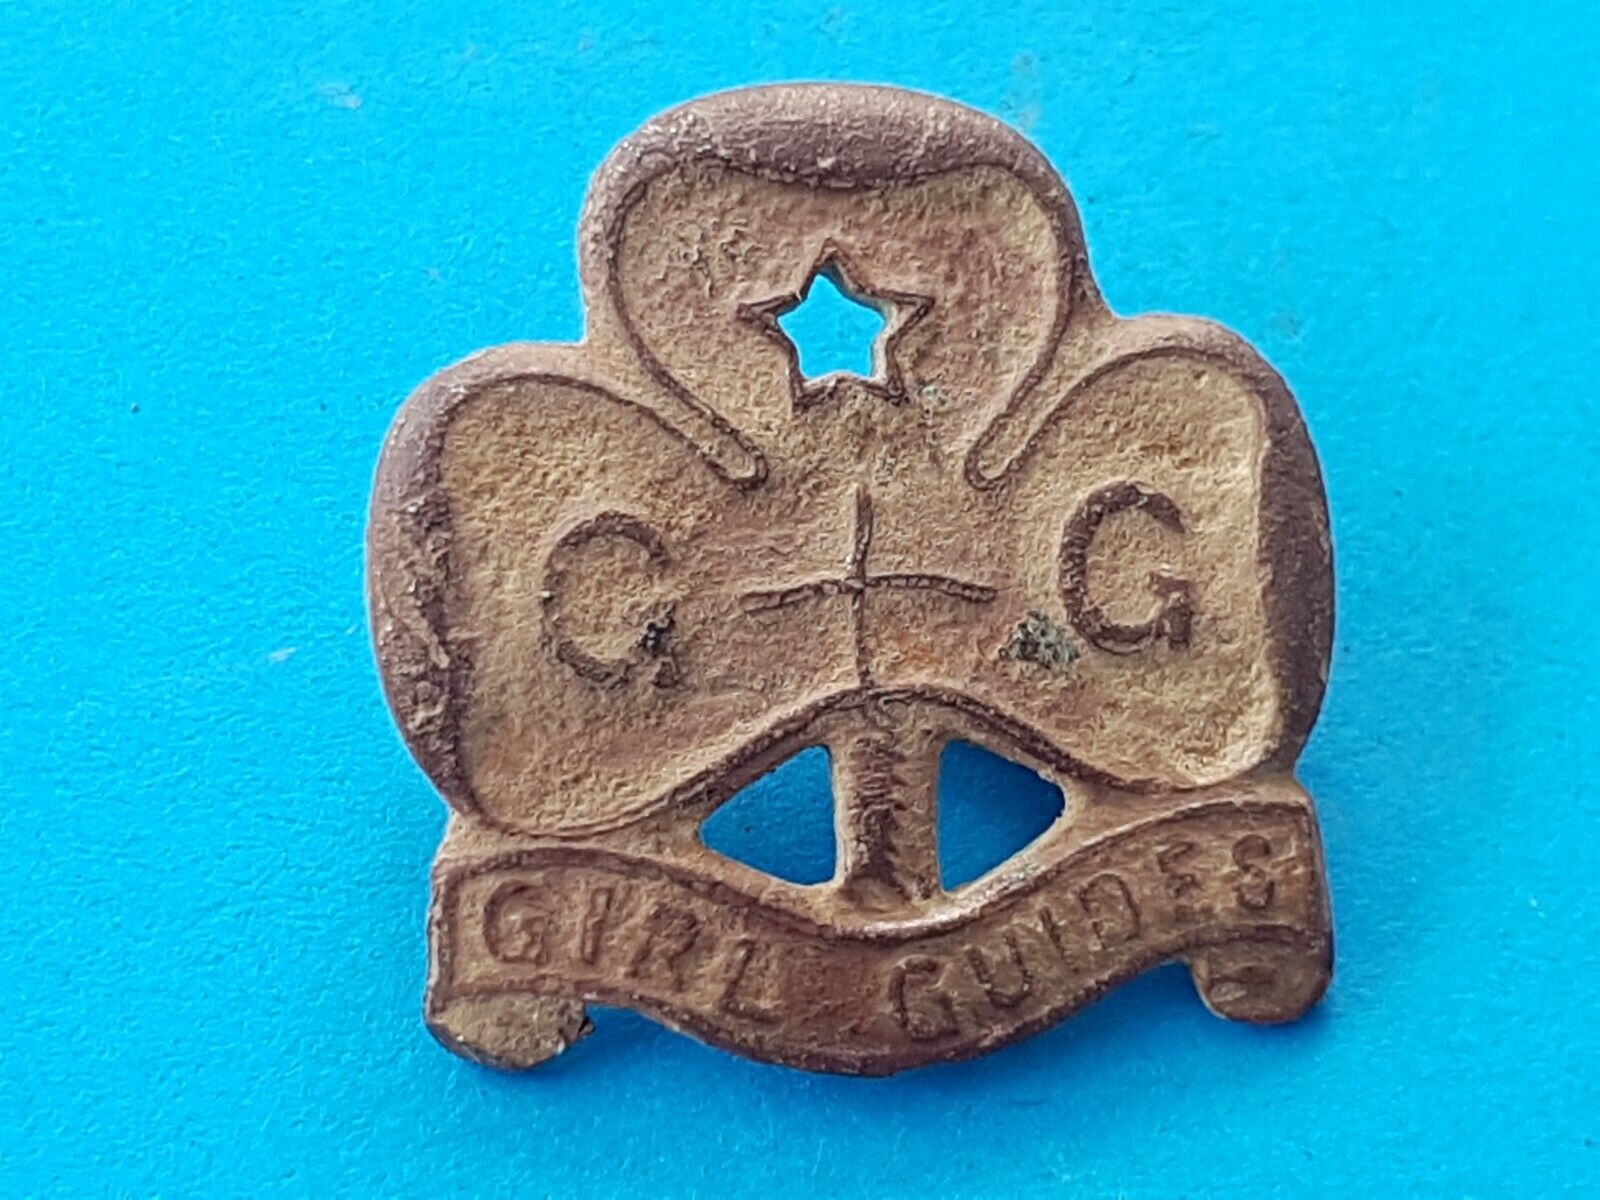 Nice little complete Girl Guides badge found in England uncleaned con. L89